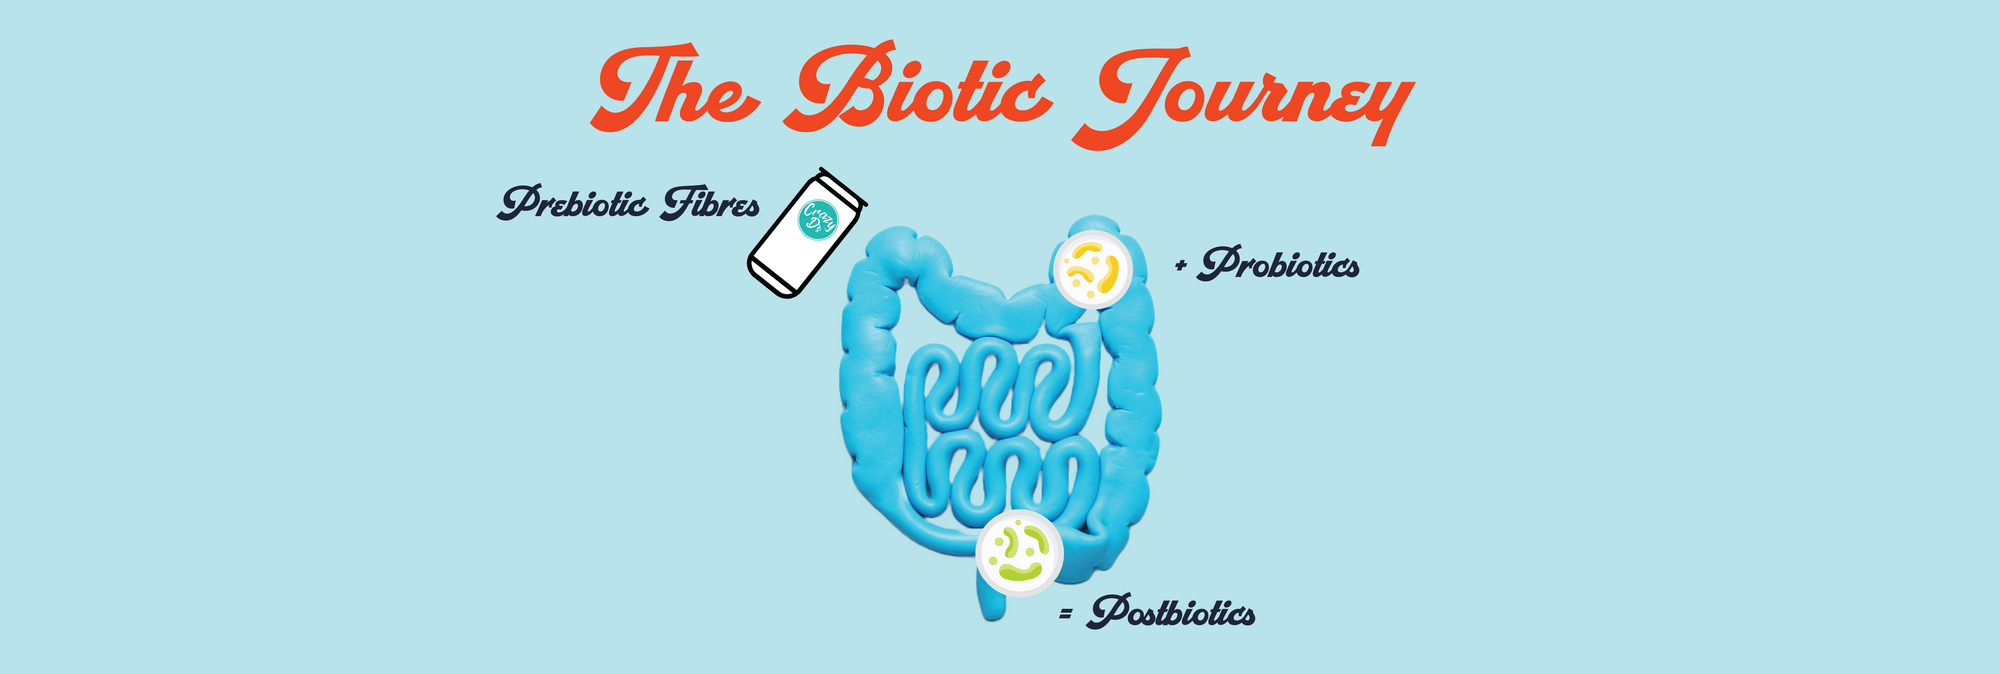 The Role of Prebiotics Throughout the Biotic Journey